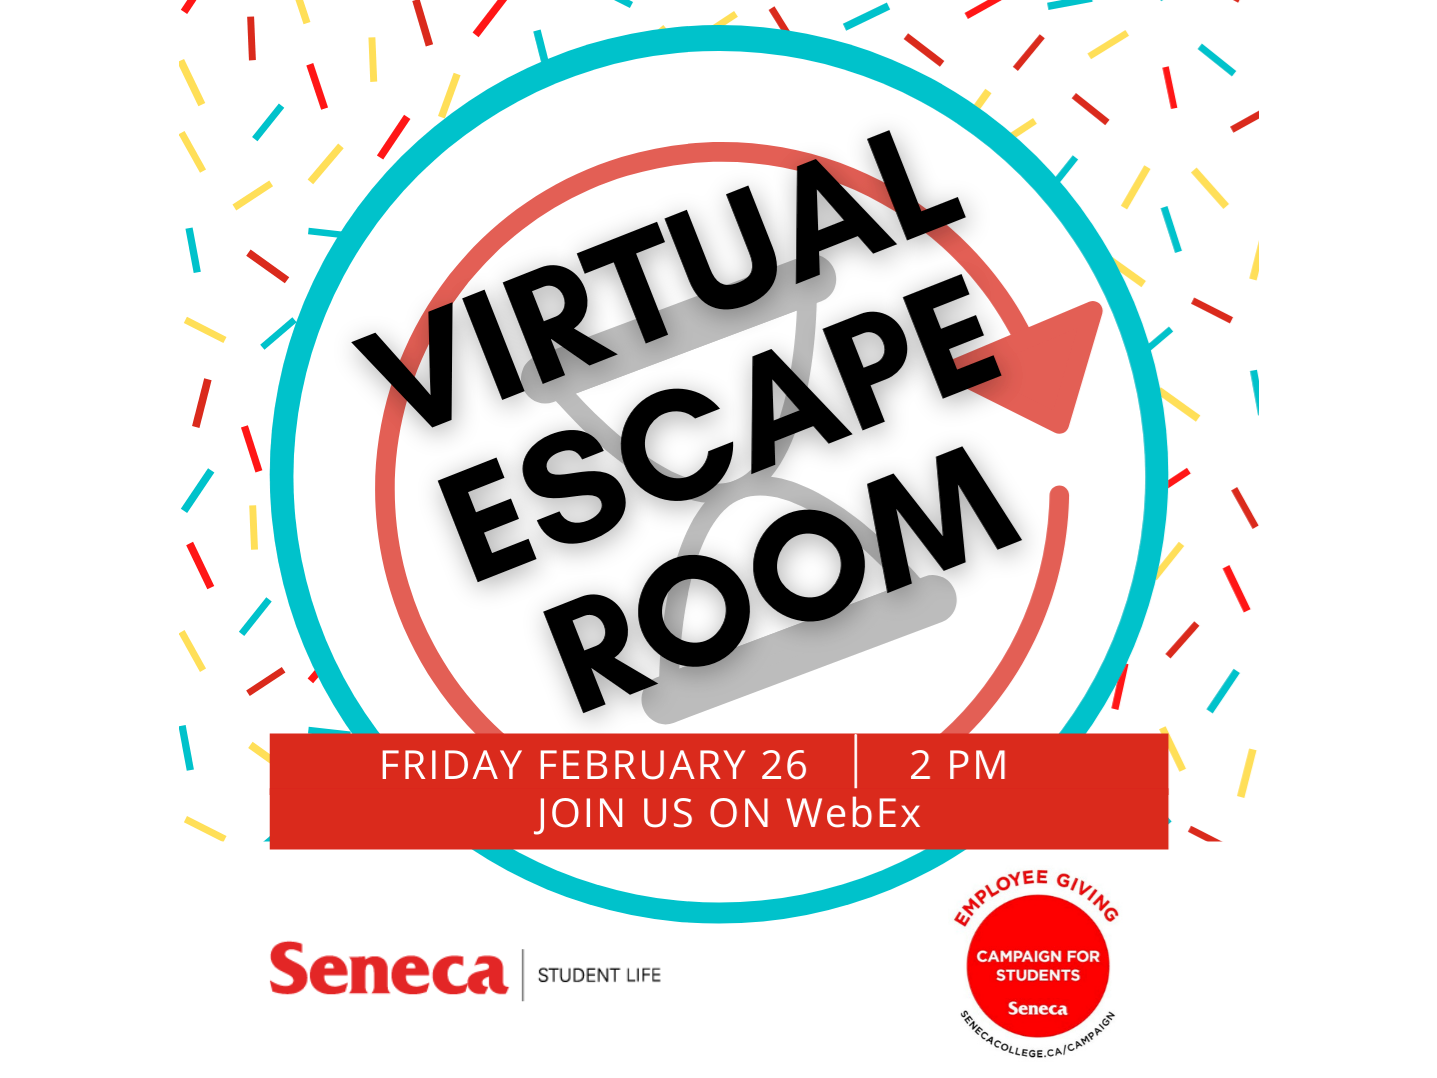 Virtual Escape Room presented by Student Services